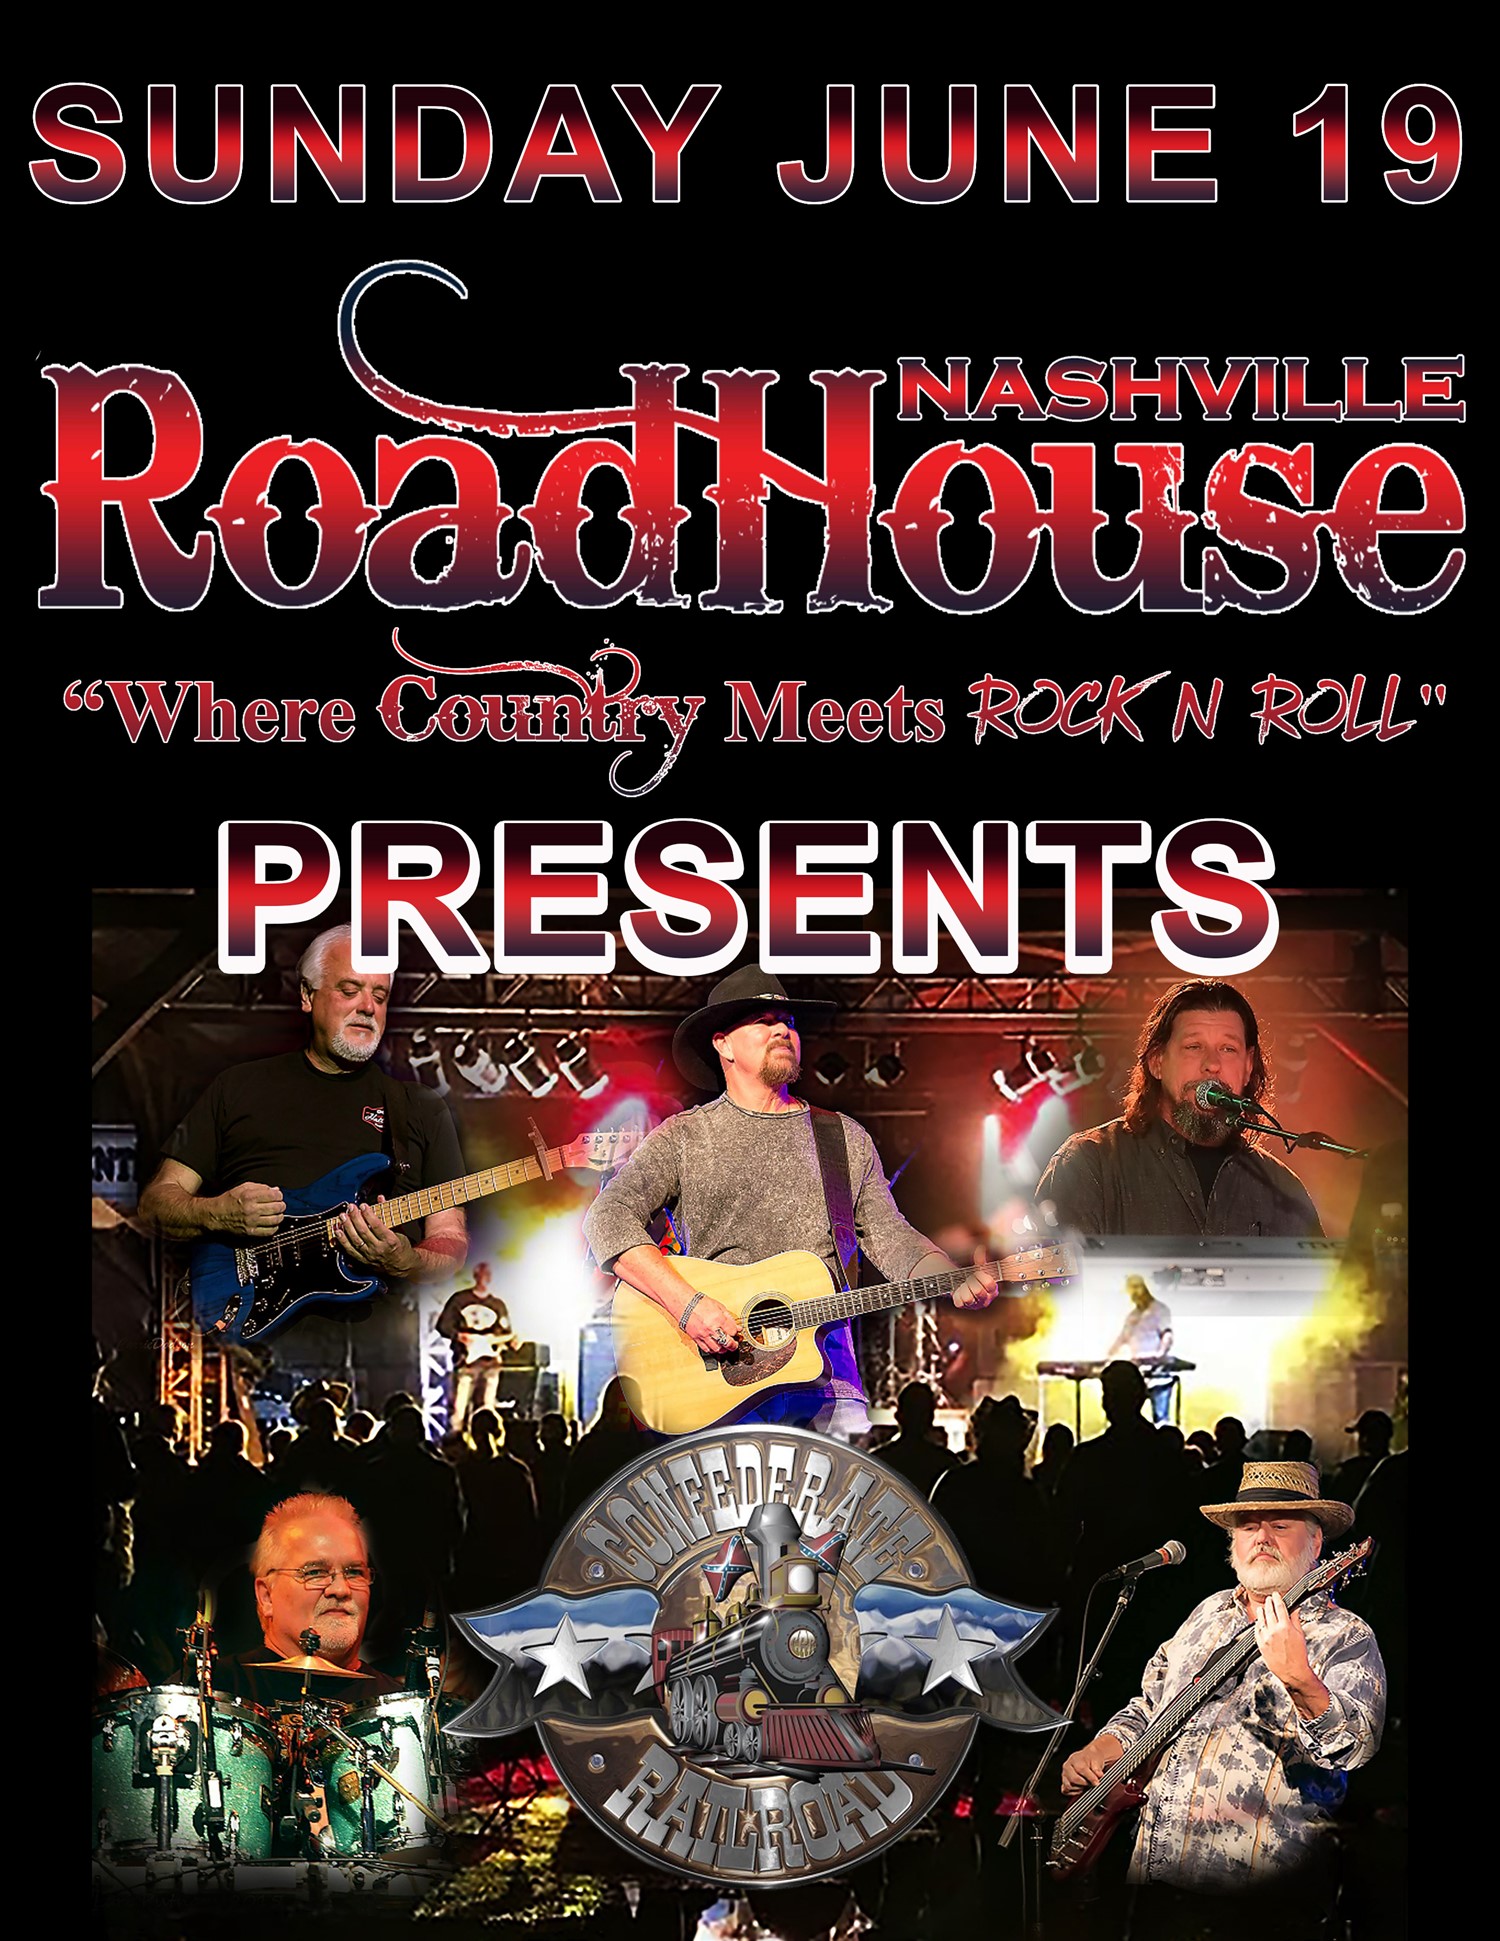 Confederate Railroad  on Jun 19, 20:00@Nashville Roadhouse Theater at The Branson Star - Pick a seat, Buy tickets and Get information on nashvilleroadhouse.com bransonstartheater